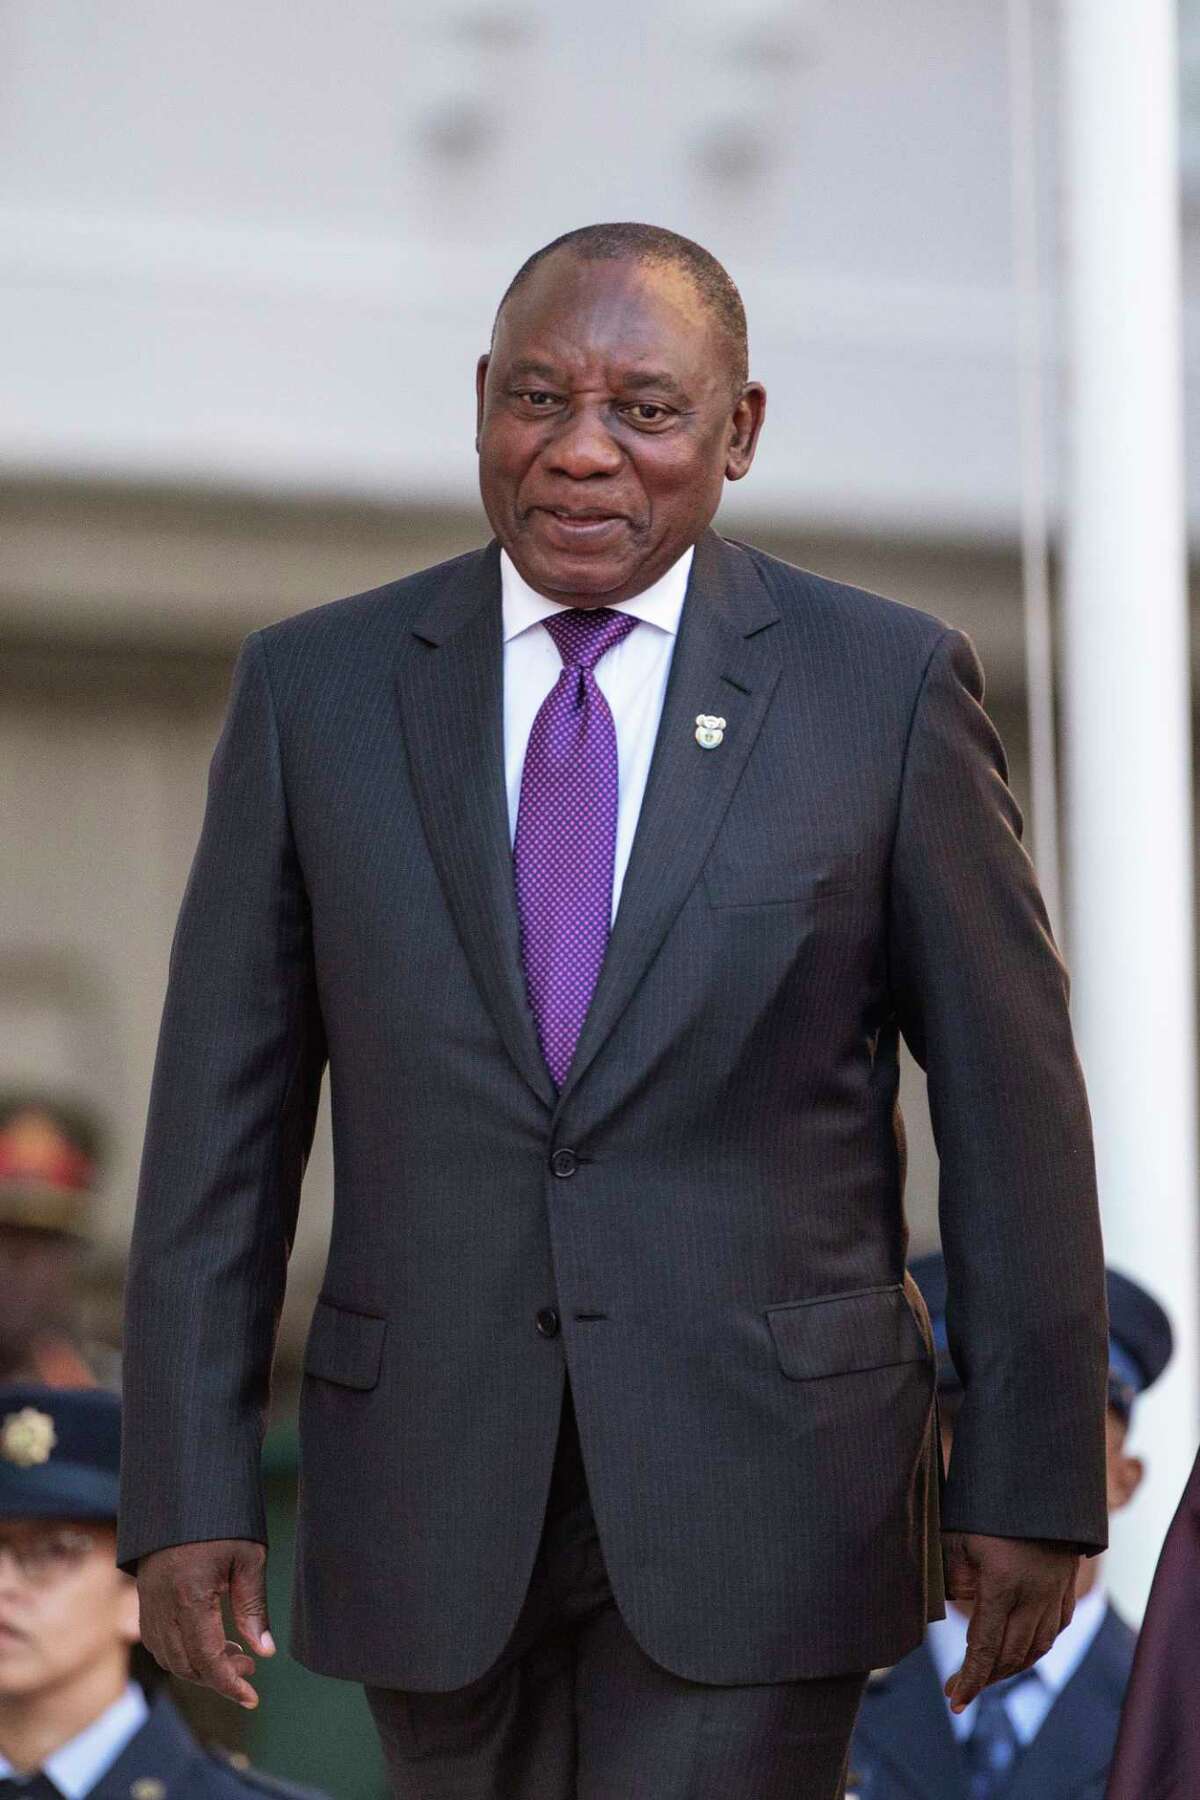 South African president pledges to 'turn tide' on corruption